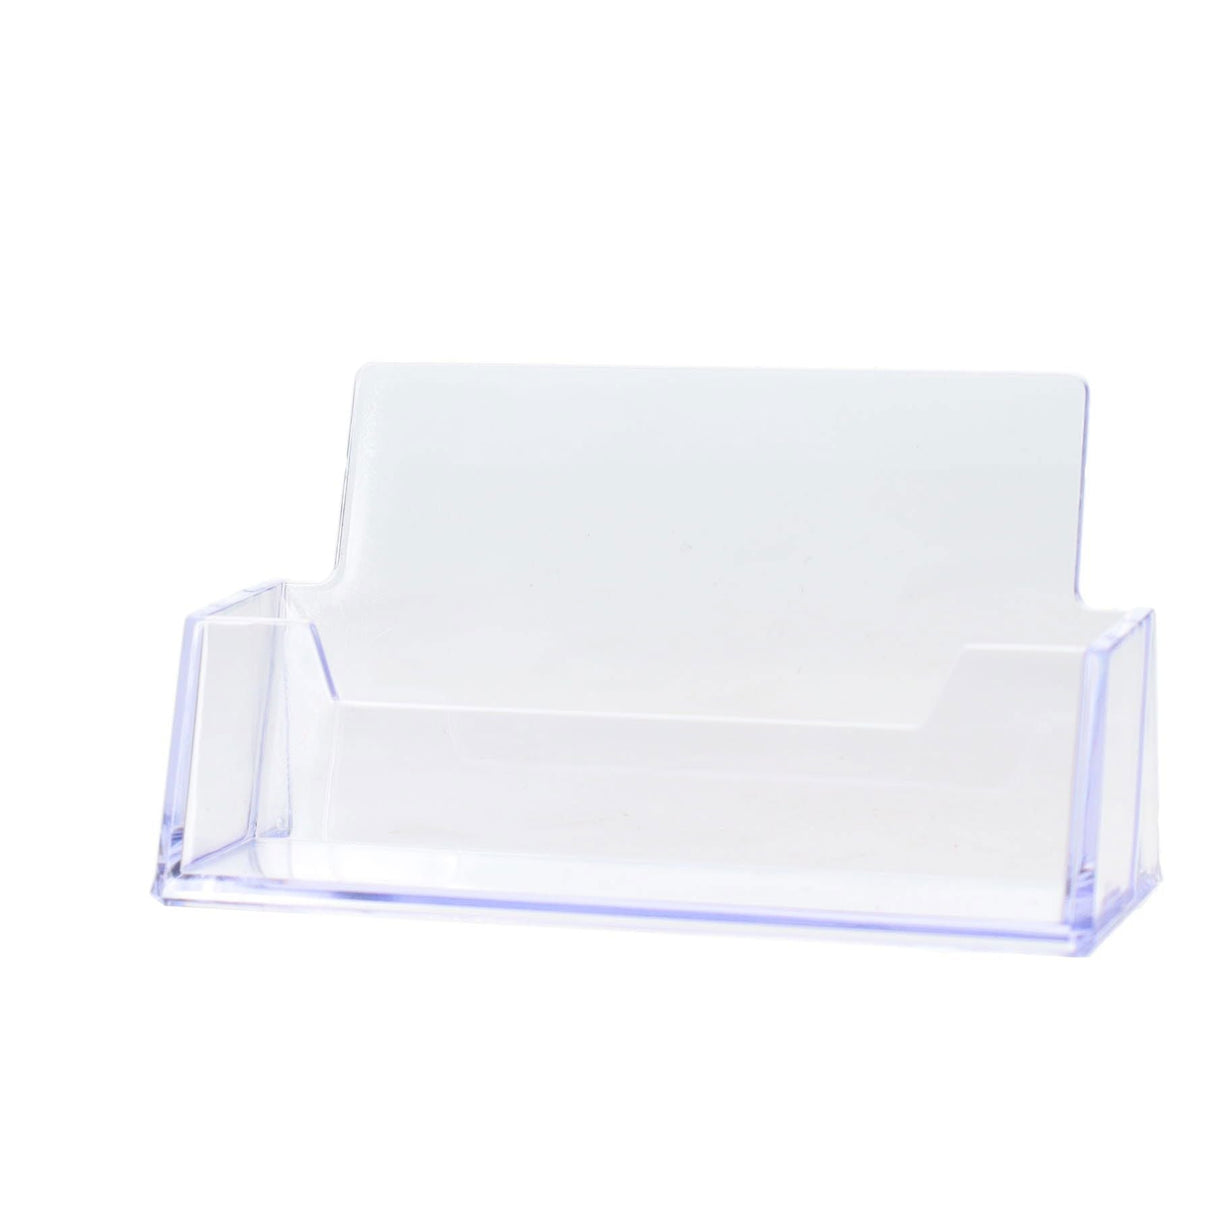 Concept Countertop Business Card Holder-Business Card Holders-Concept|StationeryShop.co.uk